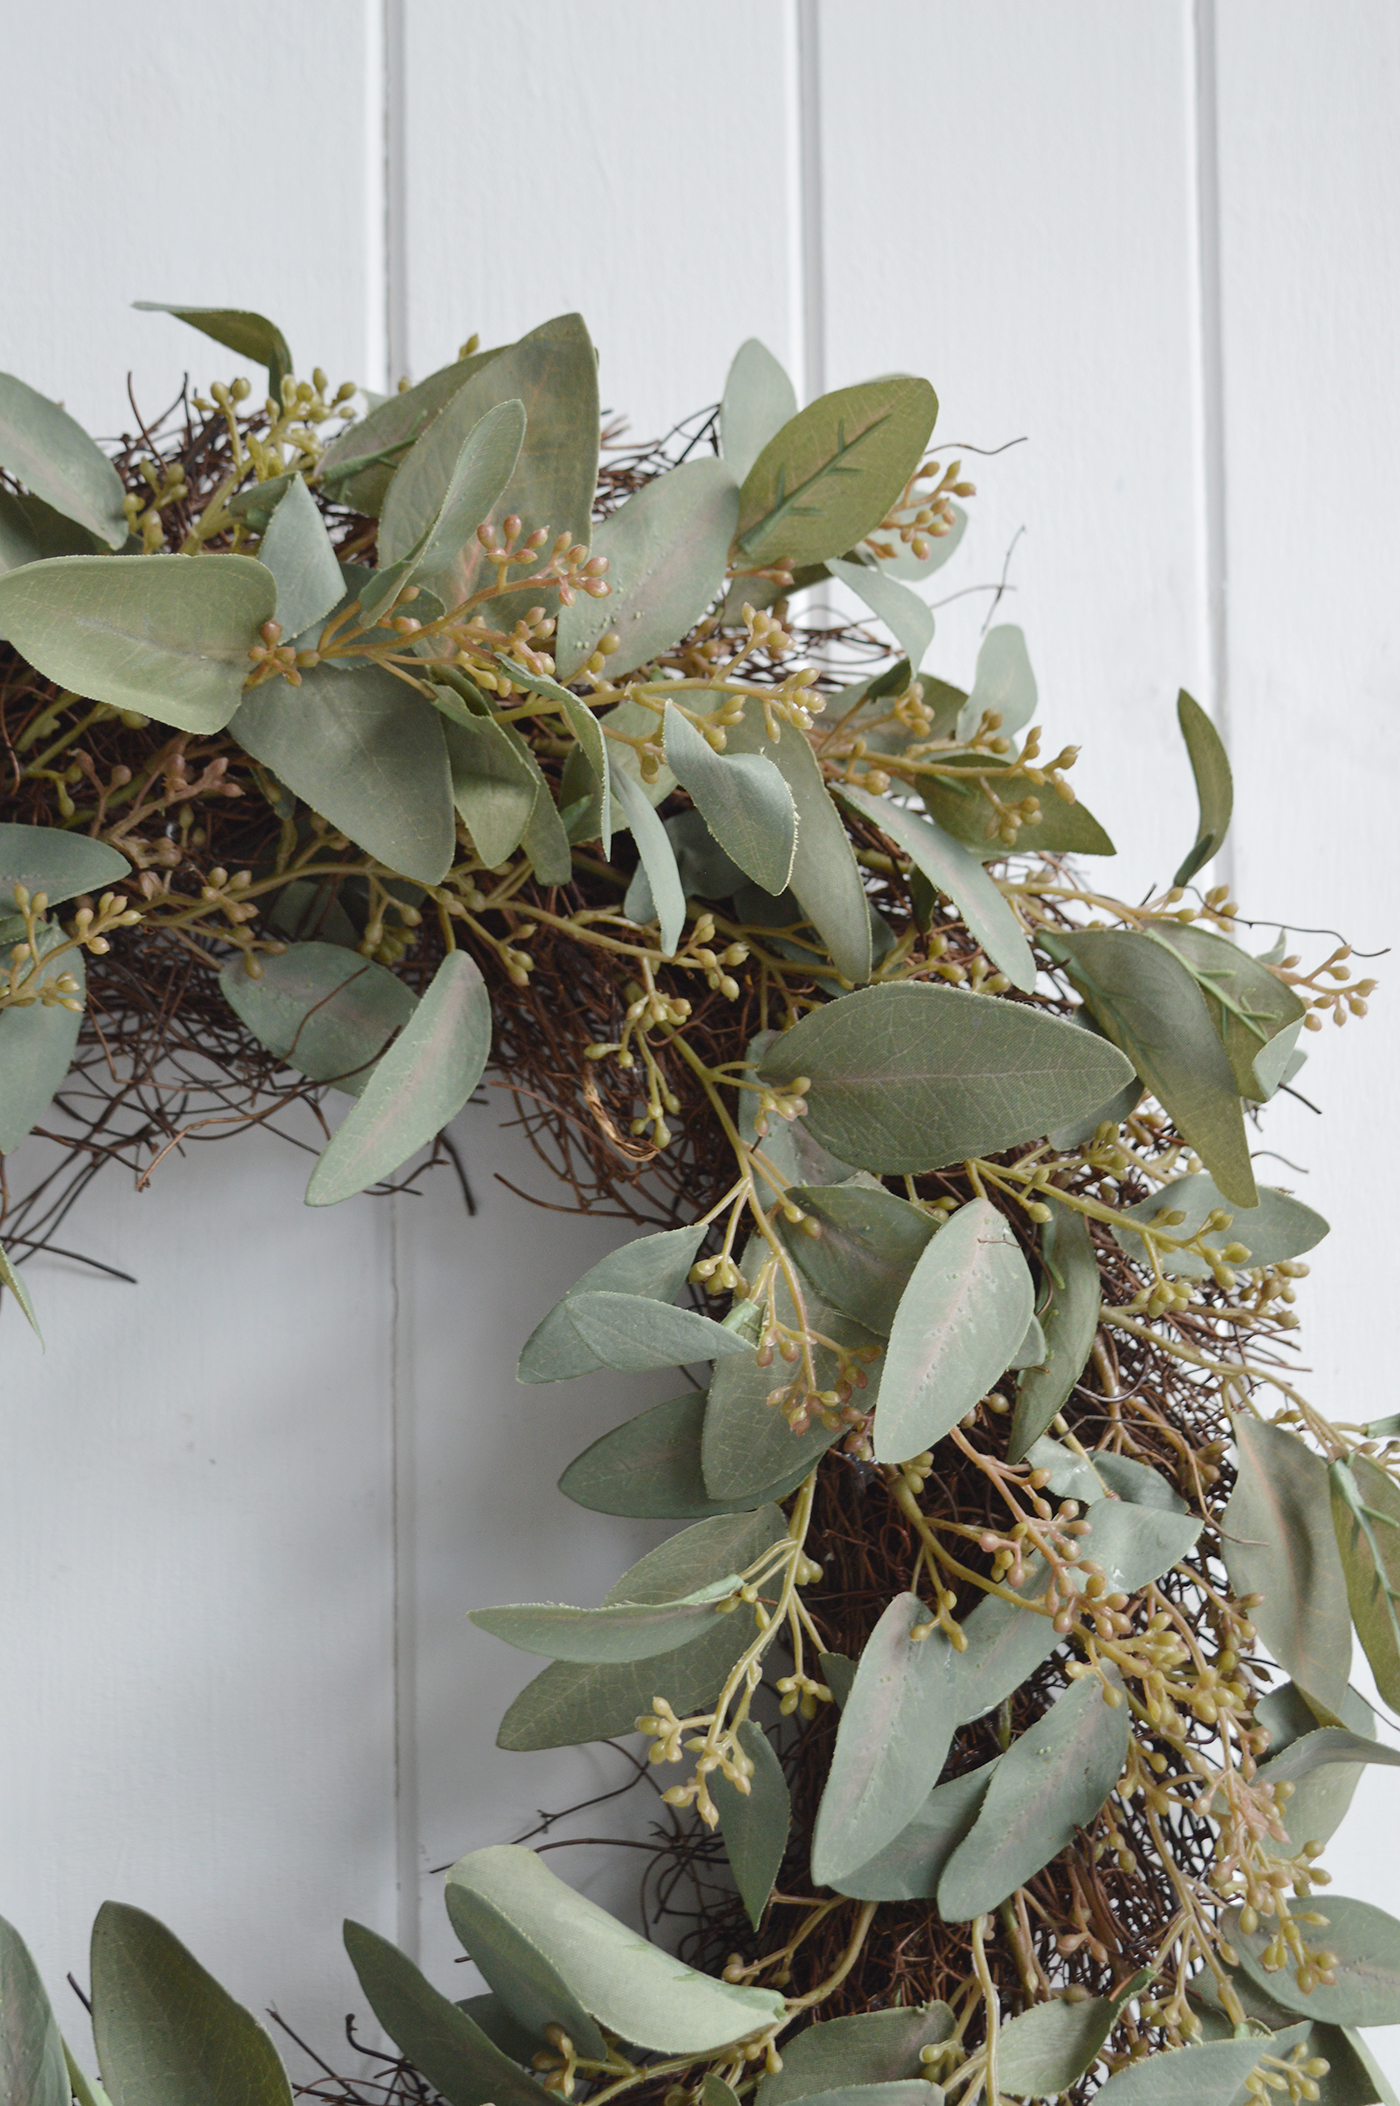 A close up of the faux Eucalyptus greenery entwined on the twig base